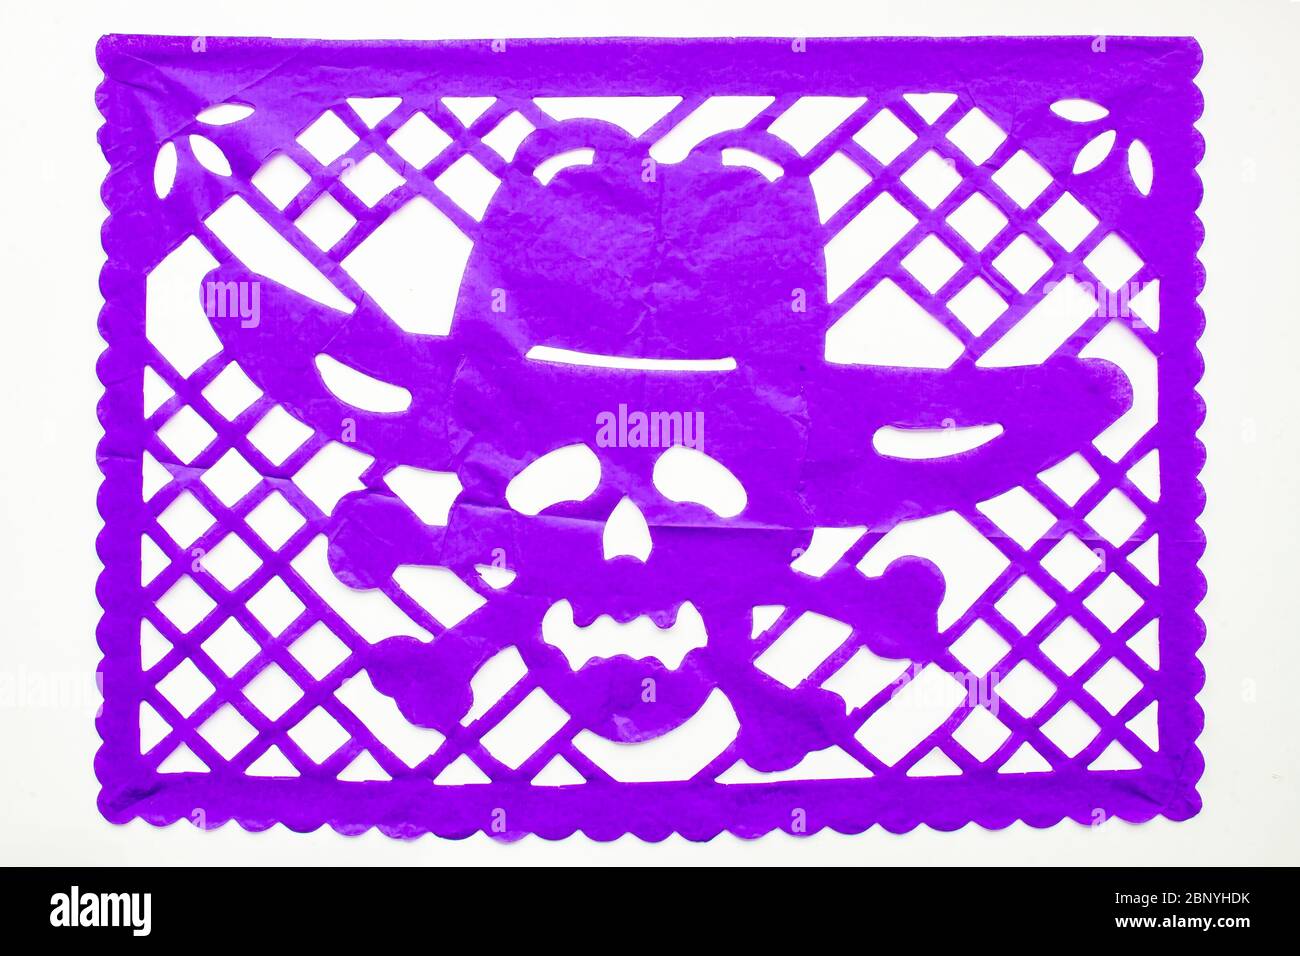 Day of the Dead, Papel Picado. Purple Real traditional Mexican paper cutting flag. Isolated on white background. Stock Photo